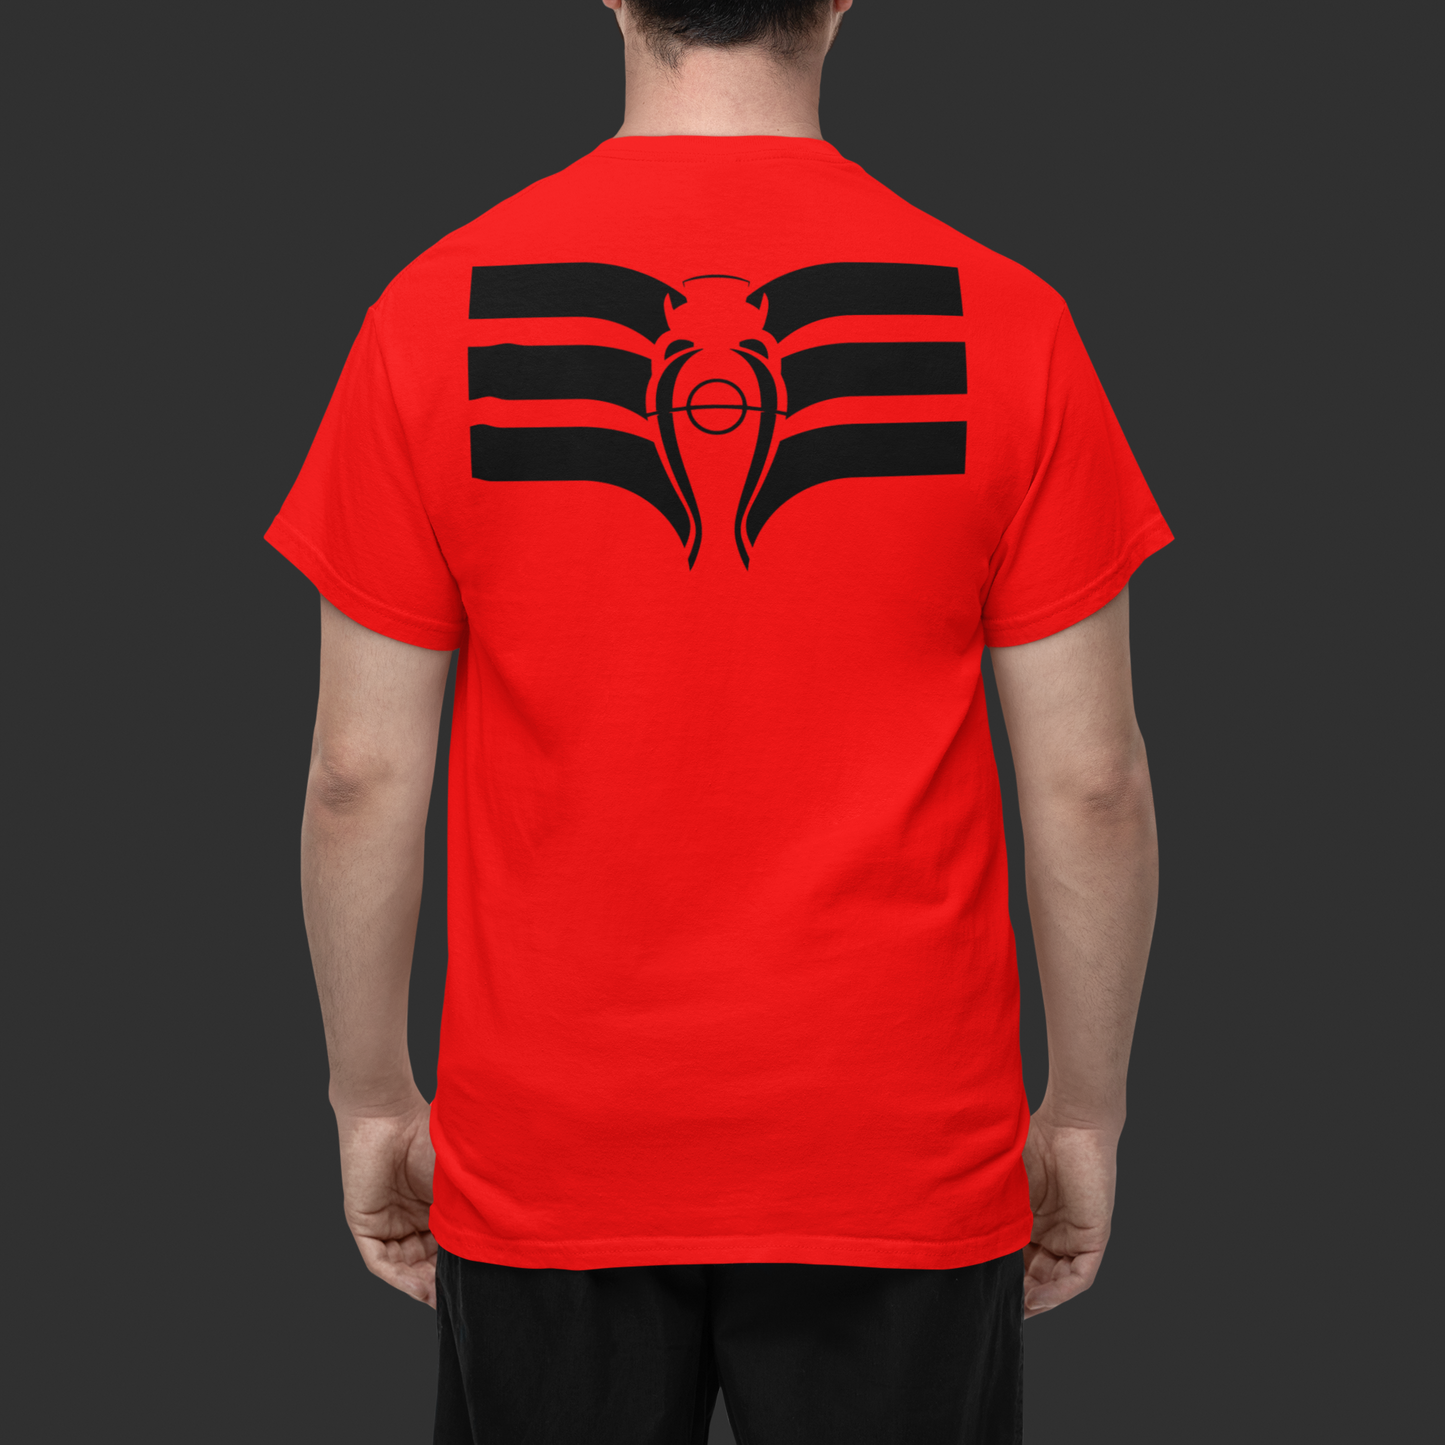 RED T-SHIRT WITH SMALL EAGLE - EAGLE ON THE BACK